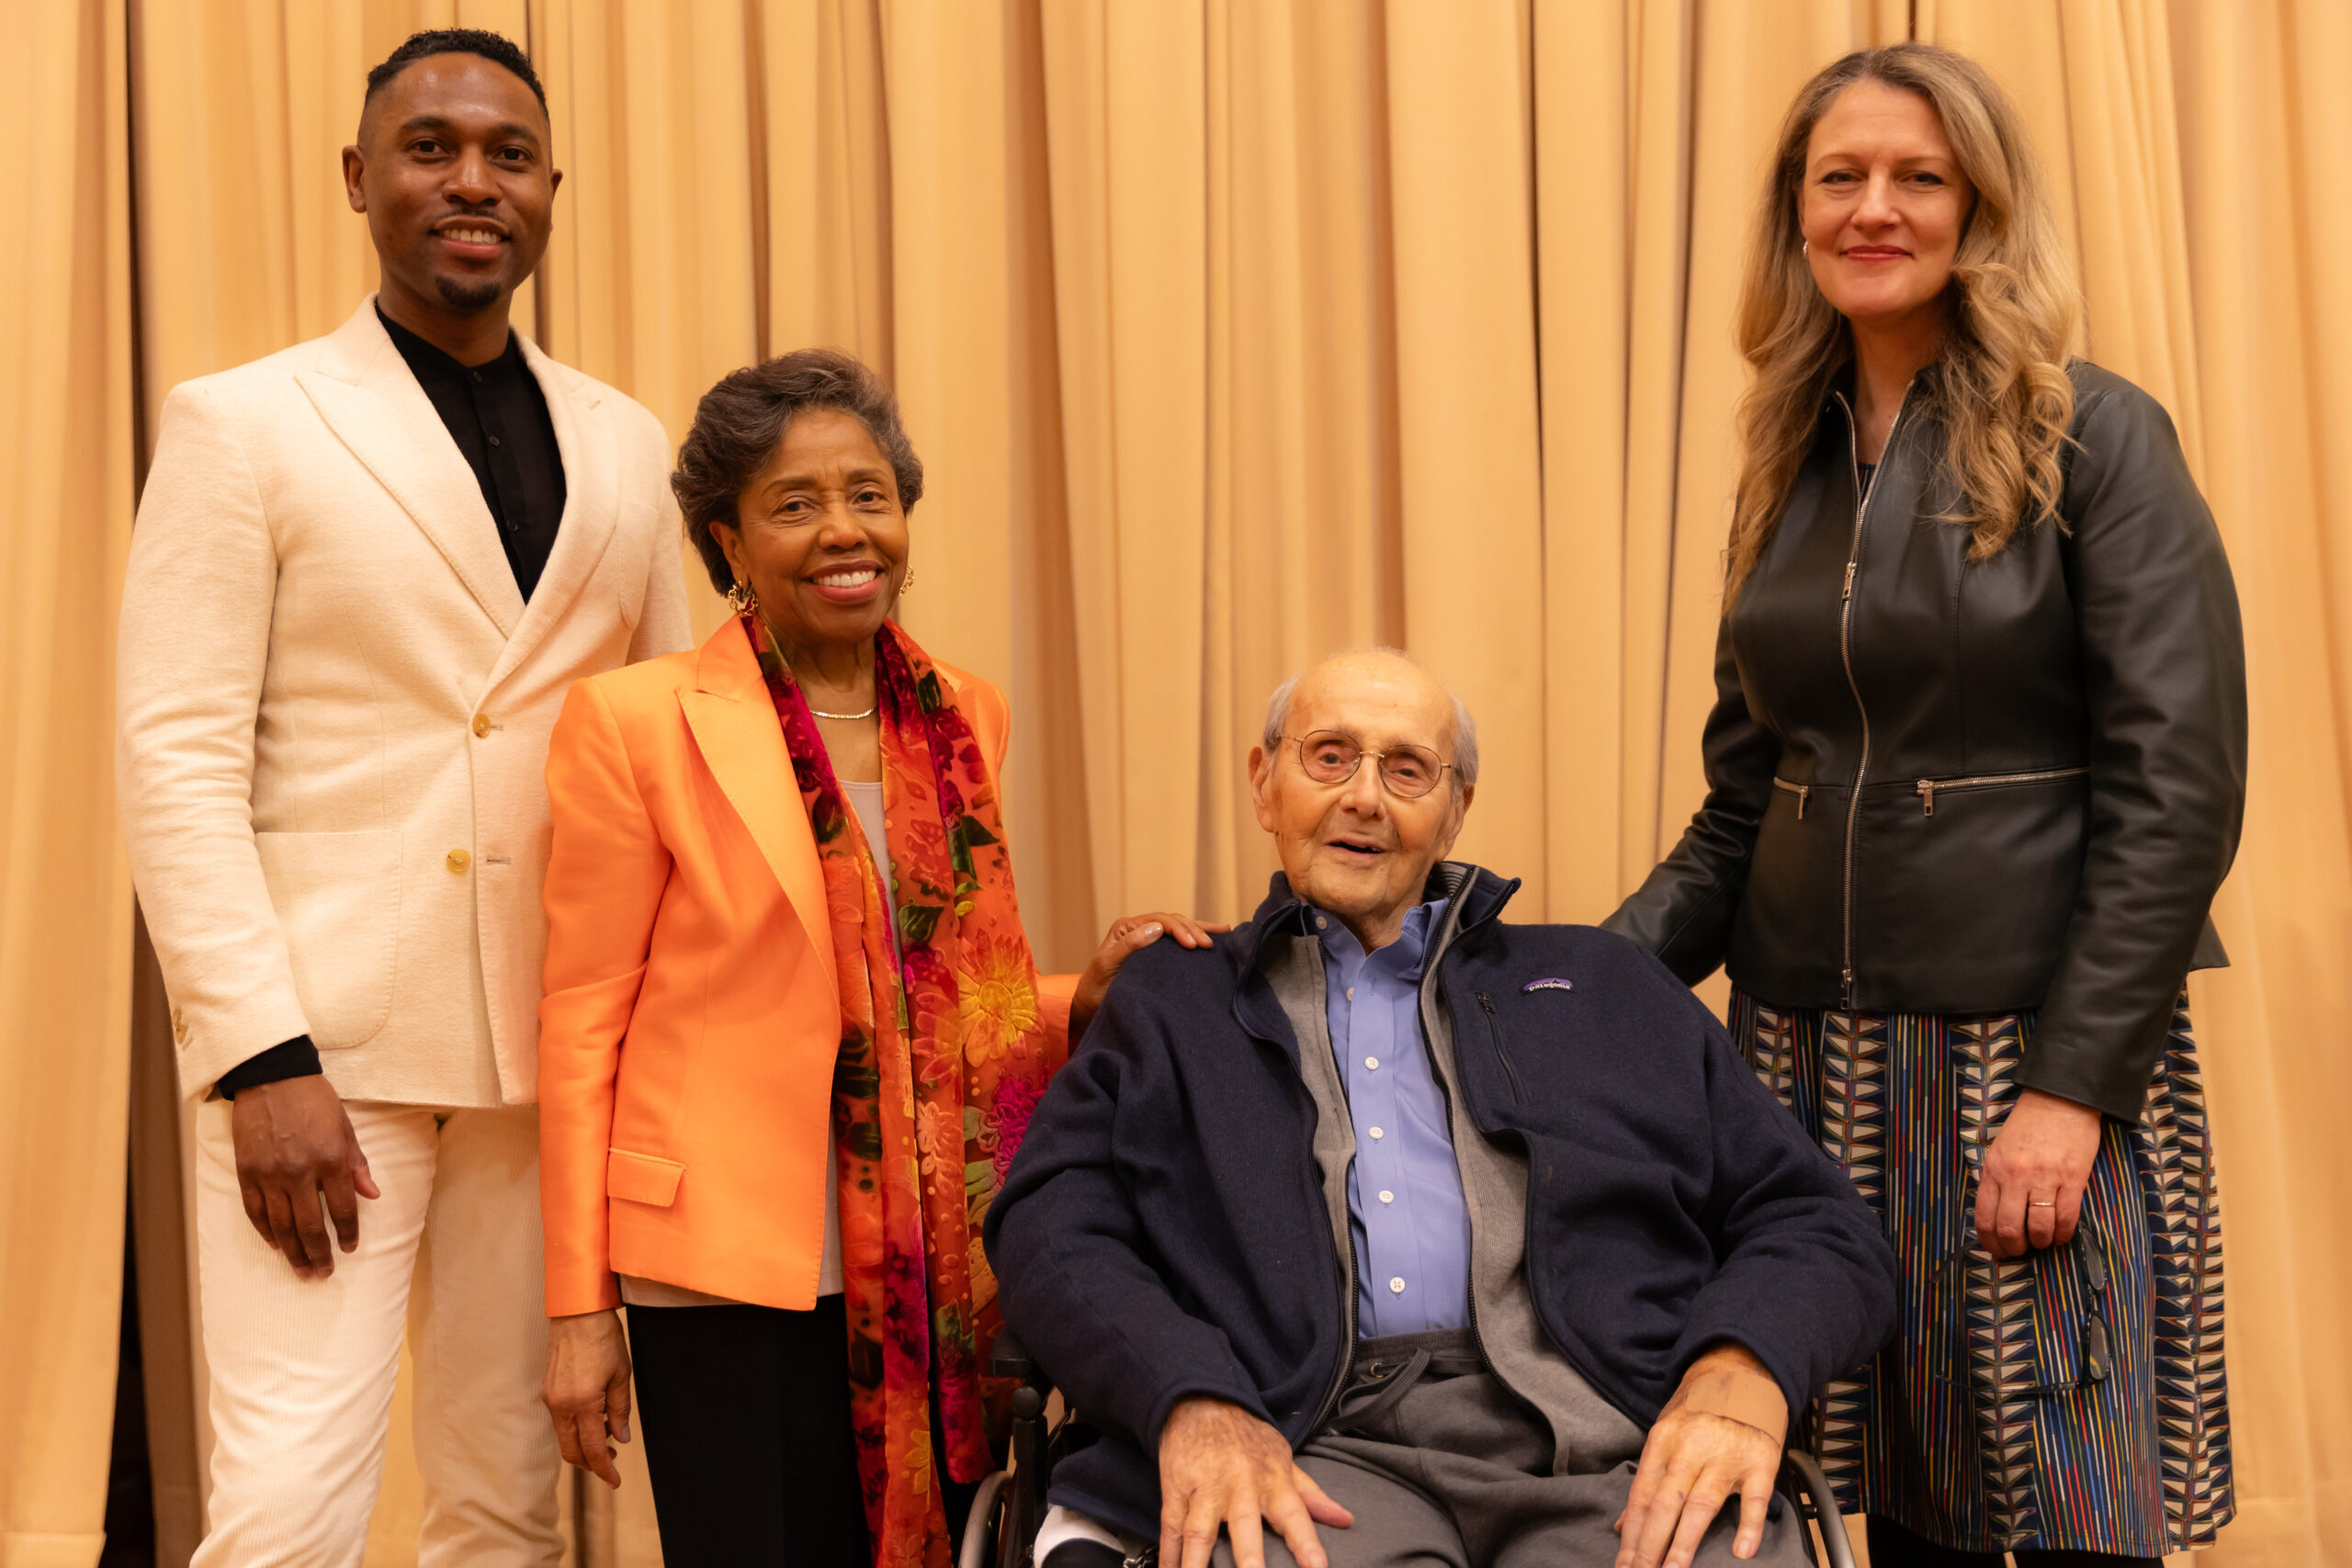 (From left) Associate Professor Malcolm J. Merriweather; Pulitzer Prize-winner and Kennedy Center honoree, conductor, and educator Tania León; Leonard Tow of The Tow Foundation; and Brooklyn College President Michelle J. Anderson at the Presidential Lecture Series event on March 28 at the college.